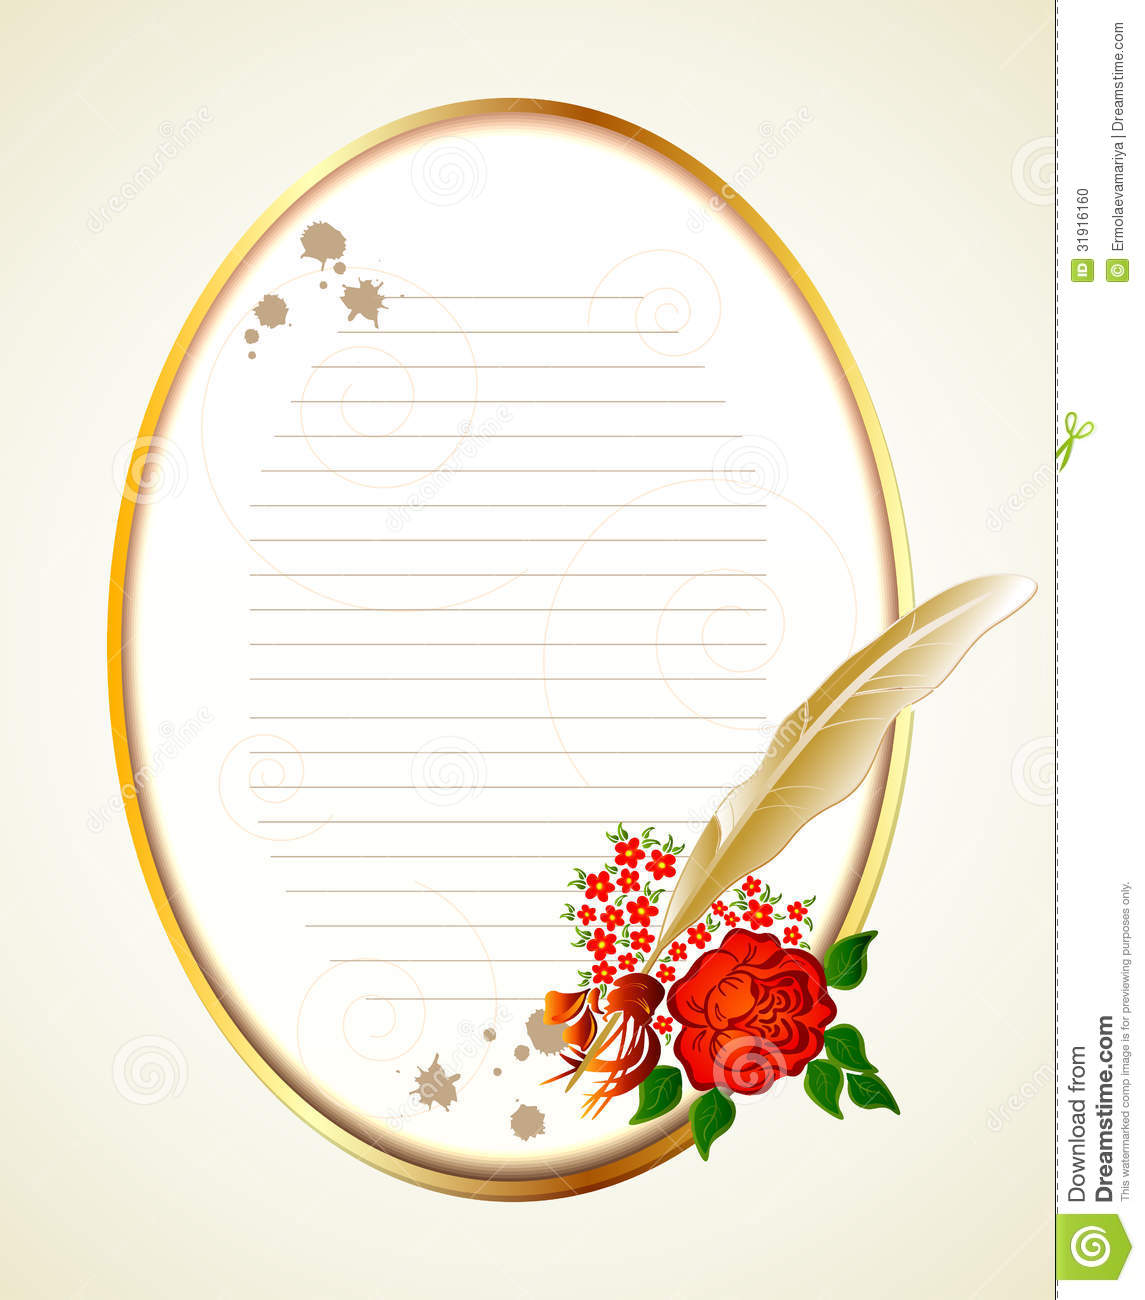 Background Images with Roses and Feathers